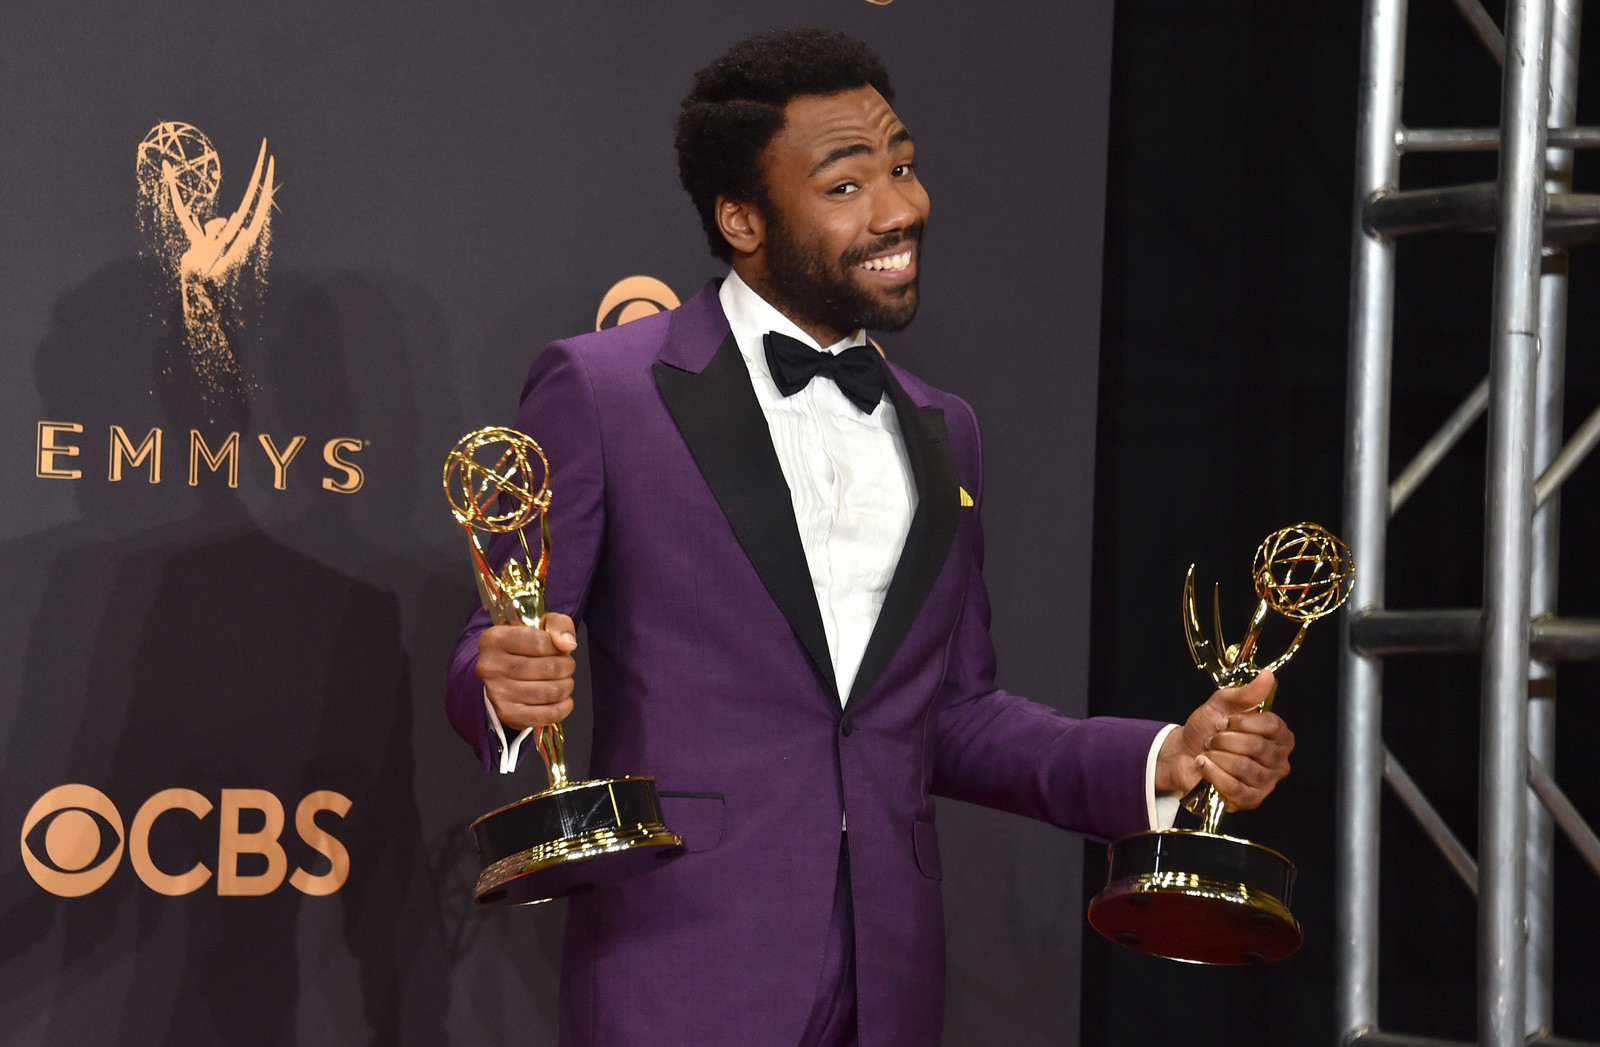 Donald Glover had a big night at the 2017 Emmy Awards on Sunday. He took home two major honors for his show Atlanta: Outstanding Directing for a Comedy Series and Outstanding Lead Actor in a Comedy Series.